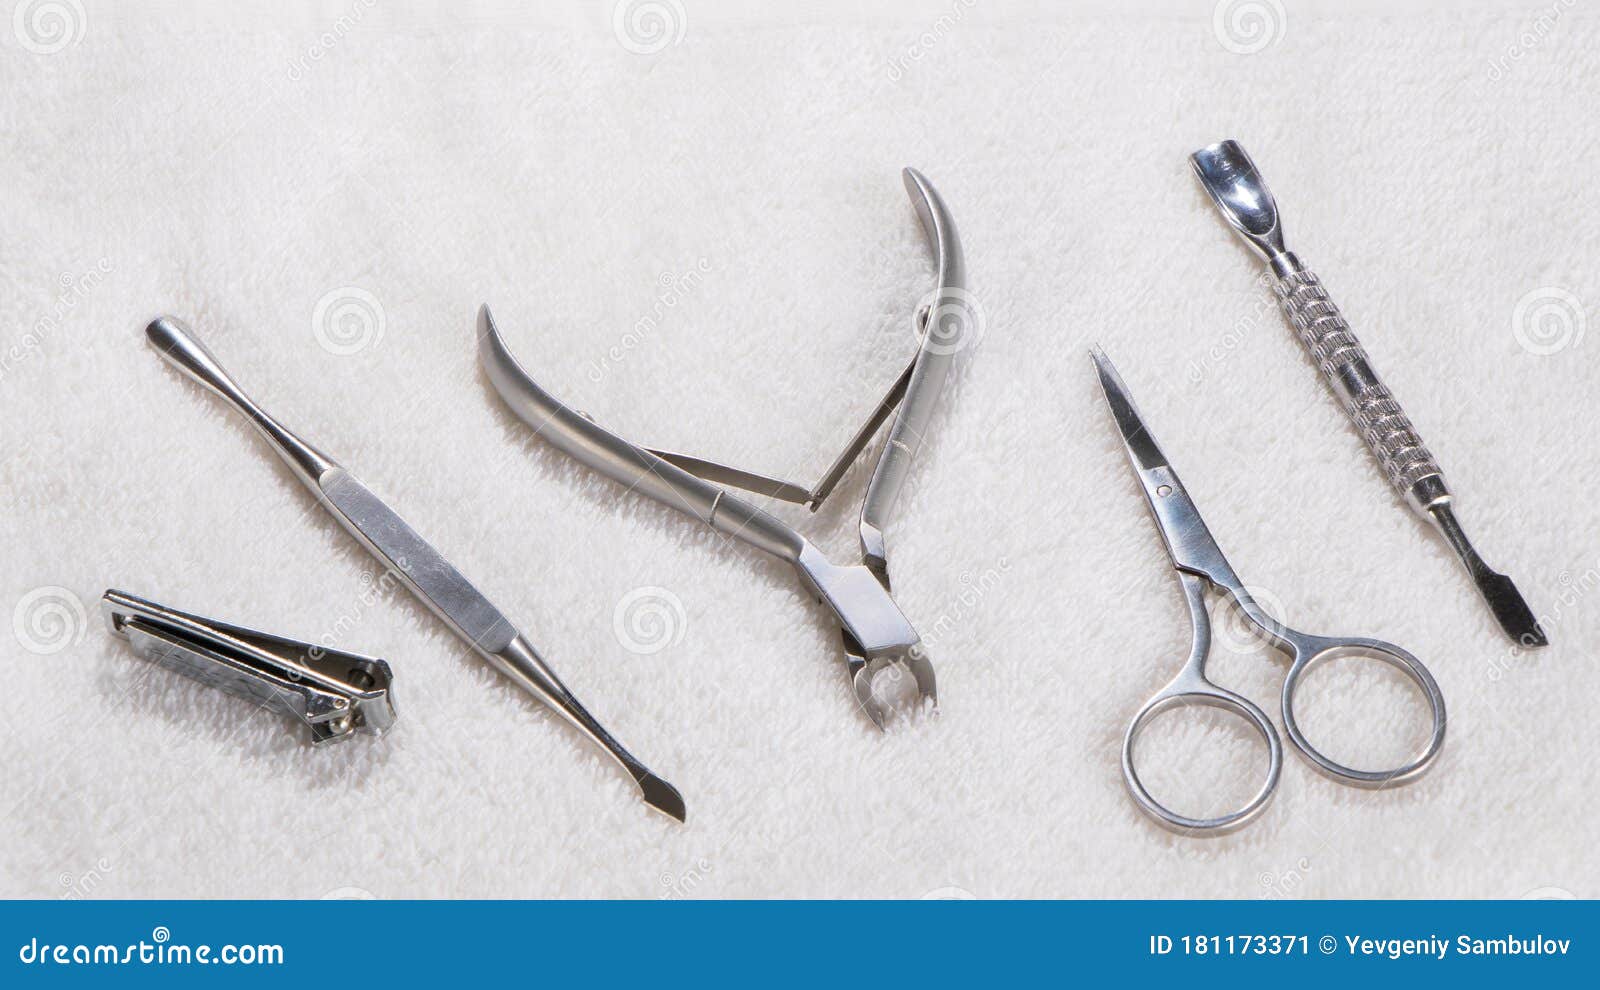 Manicure or Pedicure Set Tools are Placed on a Table with a White Towel in  the Beauty Salon. Equipment for Beauty Shop or Beauty Stock Image - Image  of home, glamour: 181173371